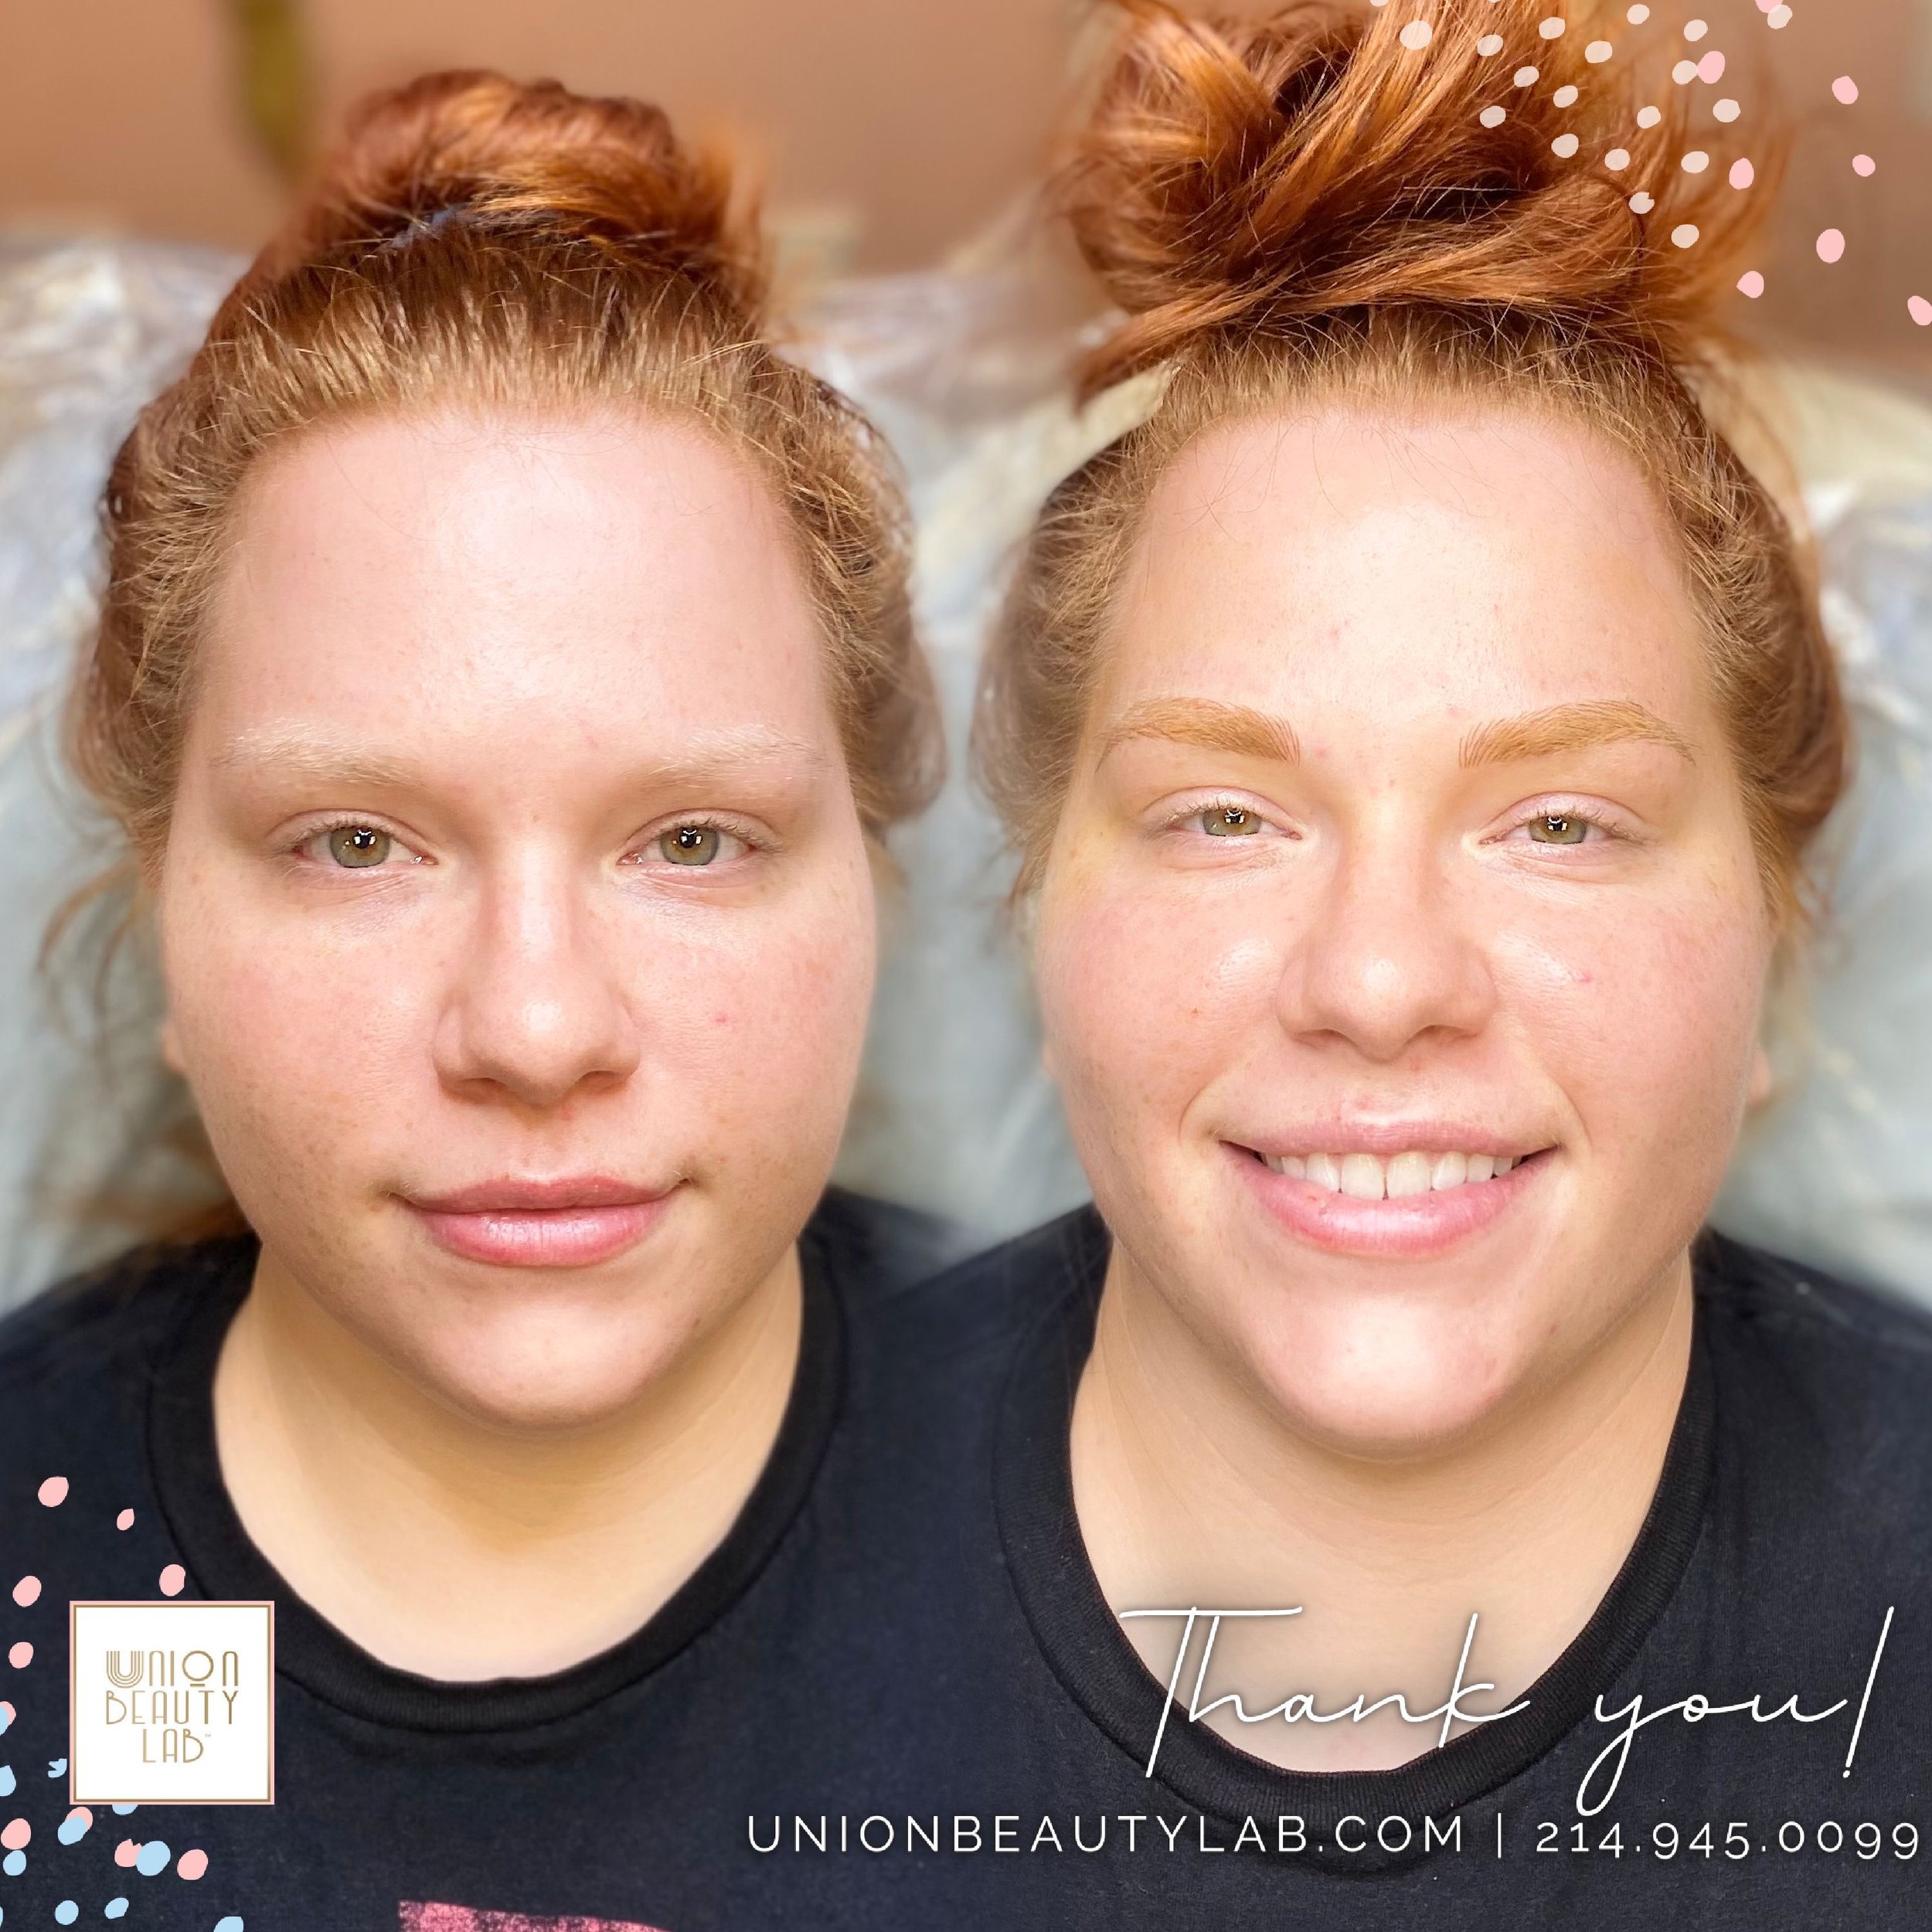 2149450099 Union Beauty Lab best places that do microblading eyebrows near me in Dallas Redhead Brows 30.JPG